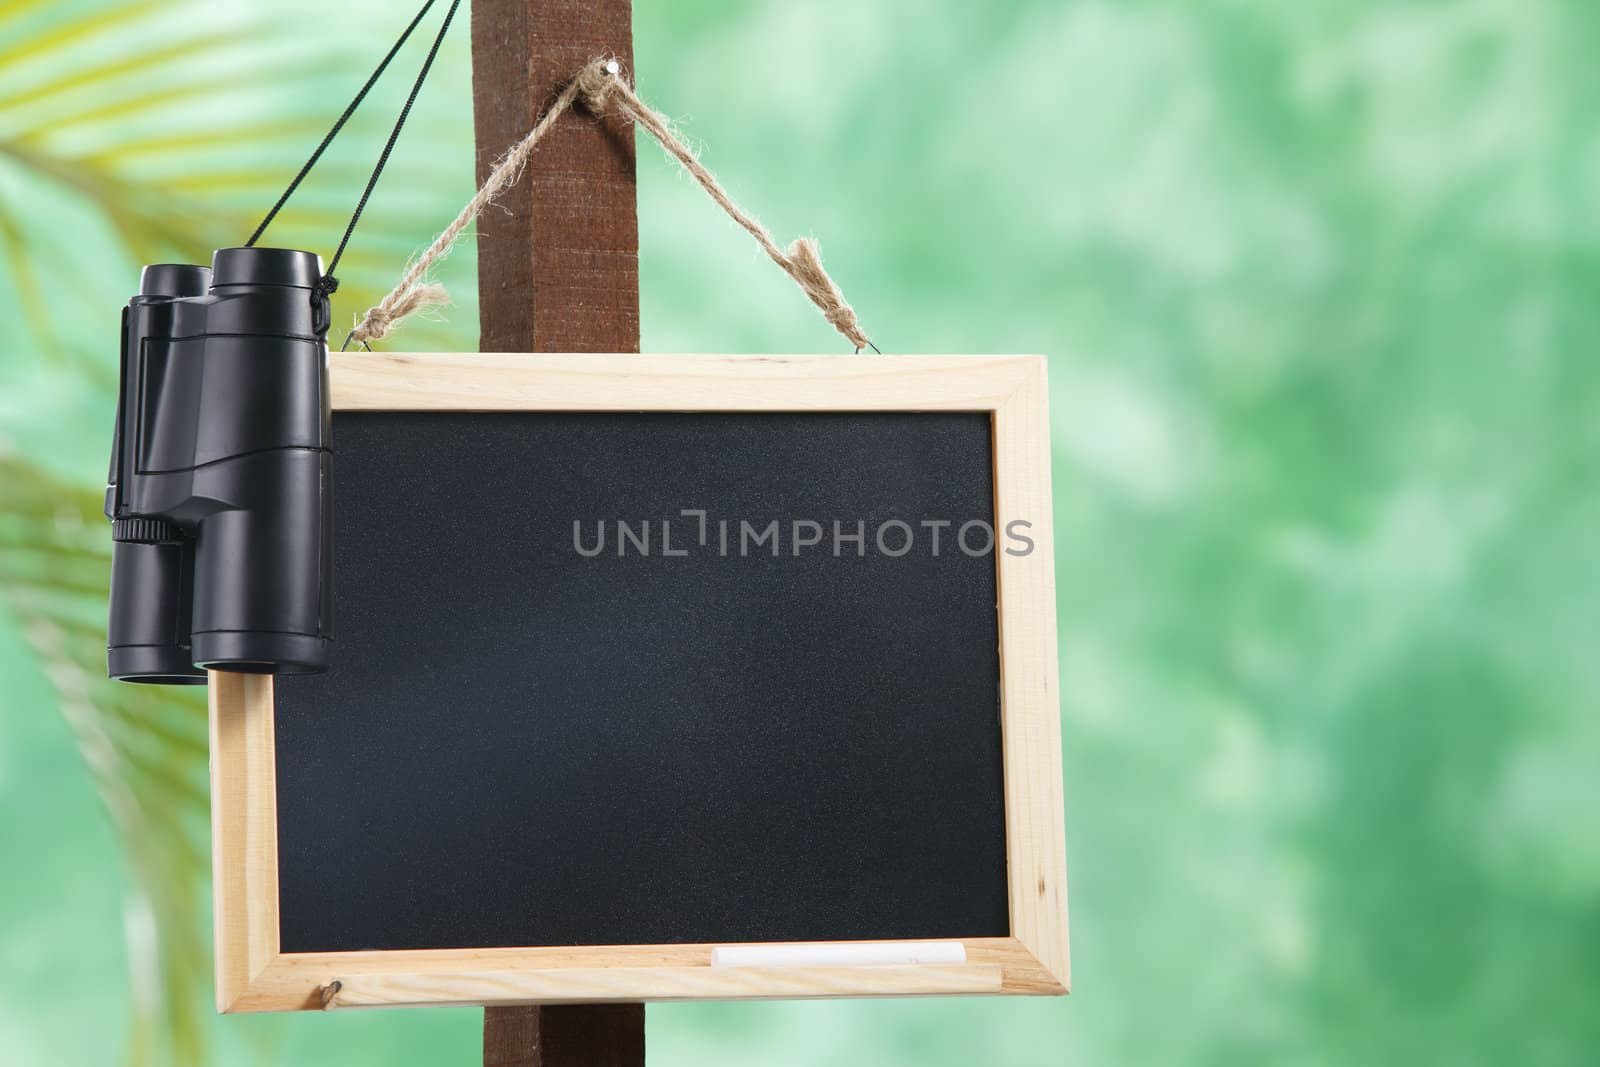 stock image of the black board and the binocular